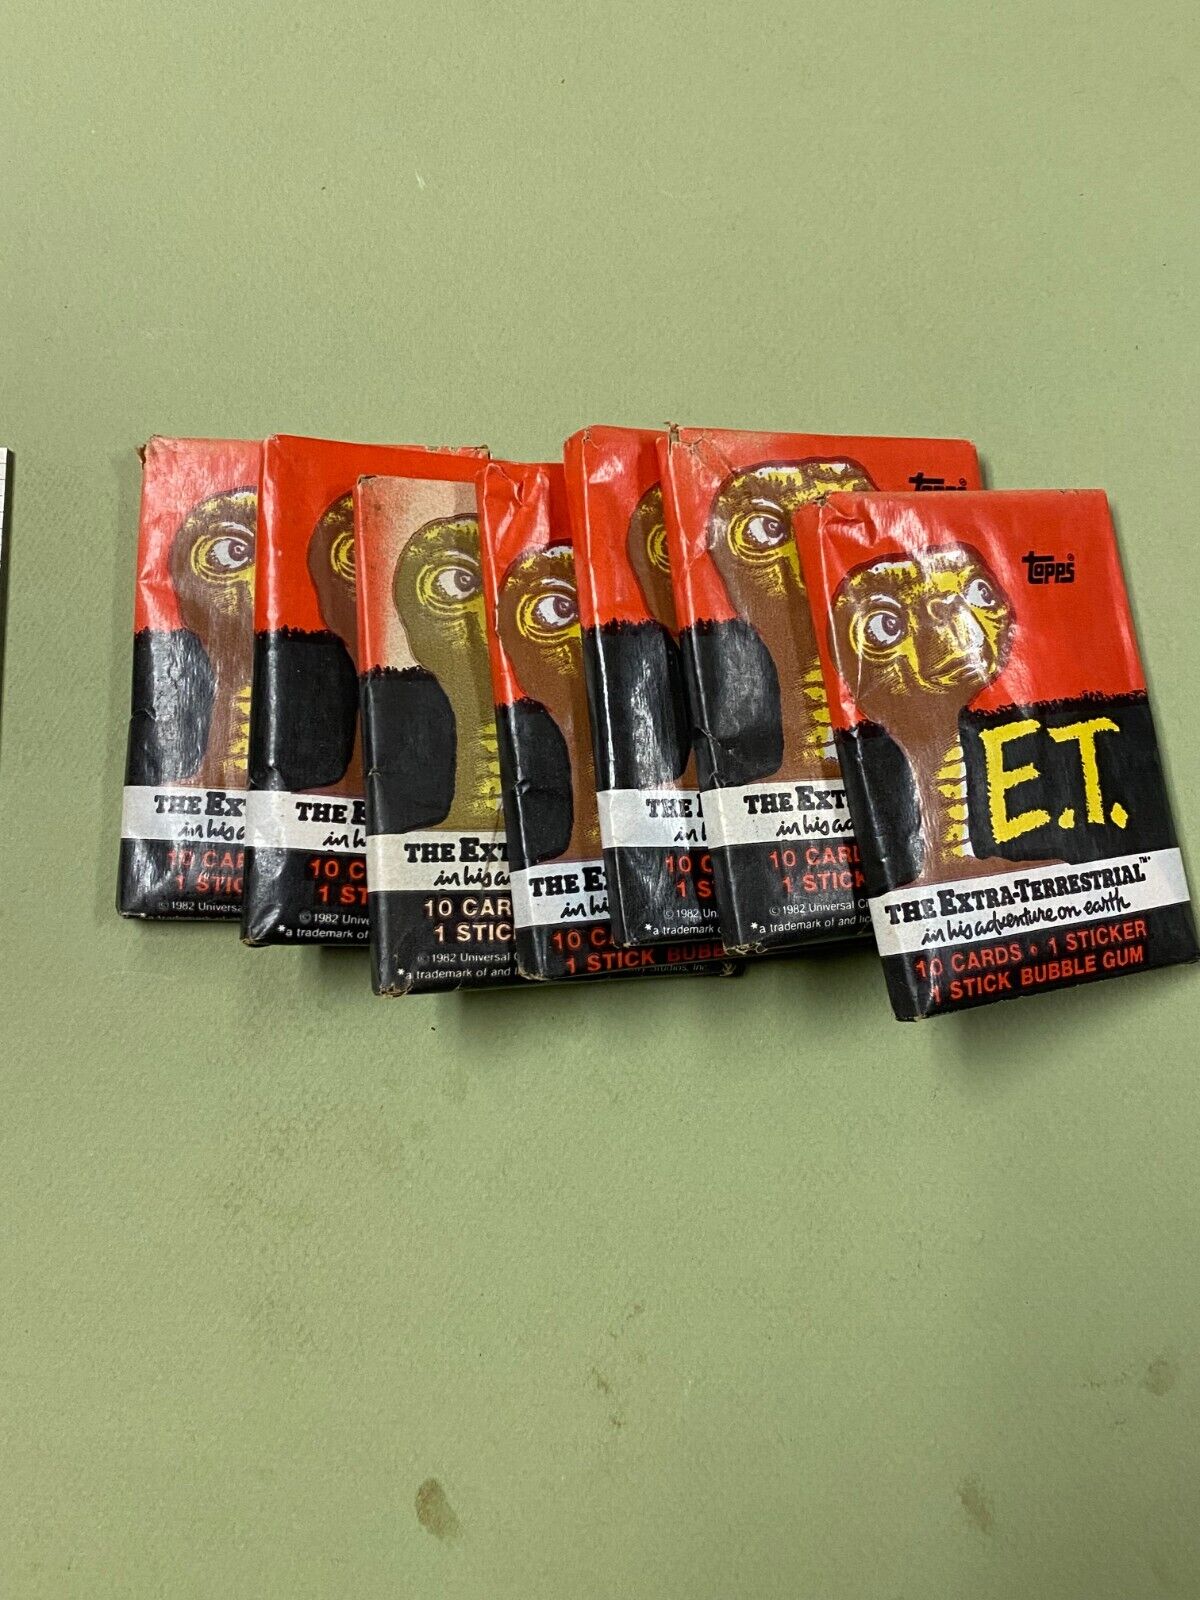 (7) 1982 Topps E.T. Wax Pack Extra Terrestrial 10 Cards Unopened Sealed Packs